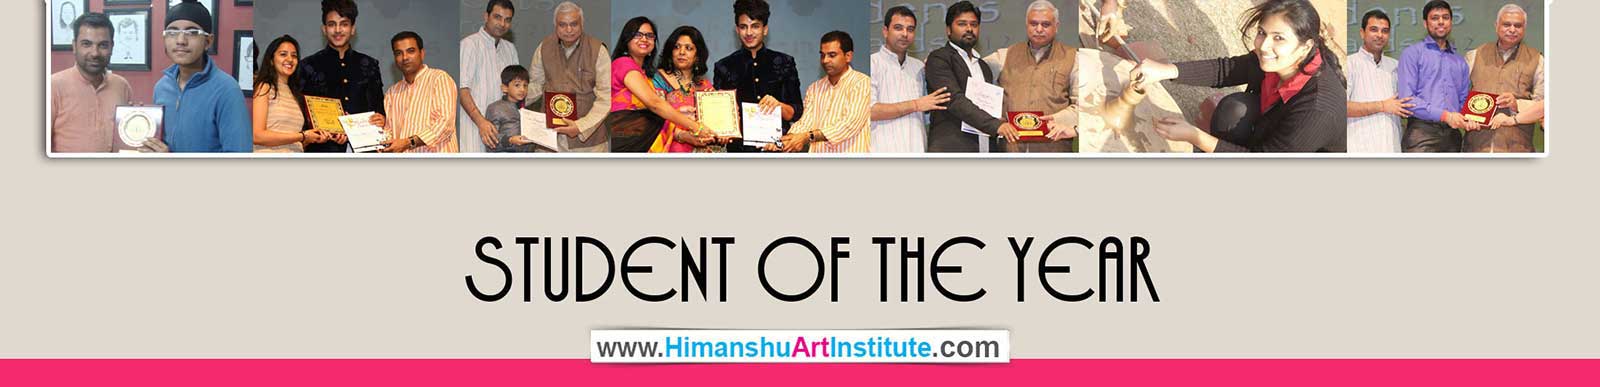 Best Students of Fine Arts, Arts & Crafts, Drawing, Painting, and Sketching at Himanshu Art Institute